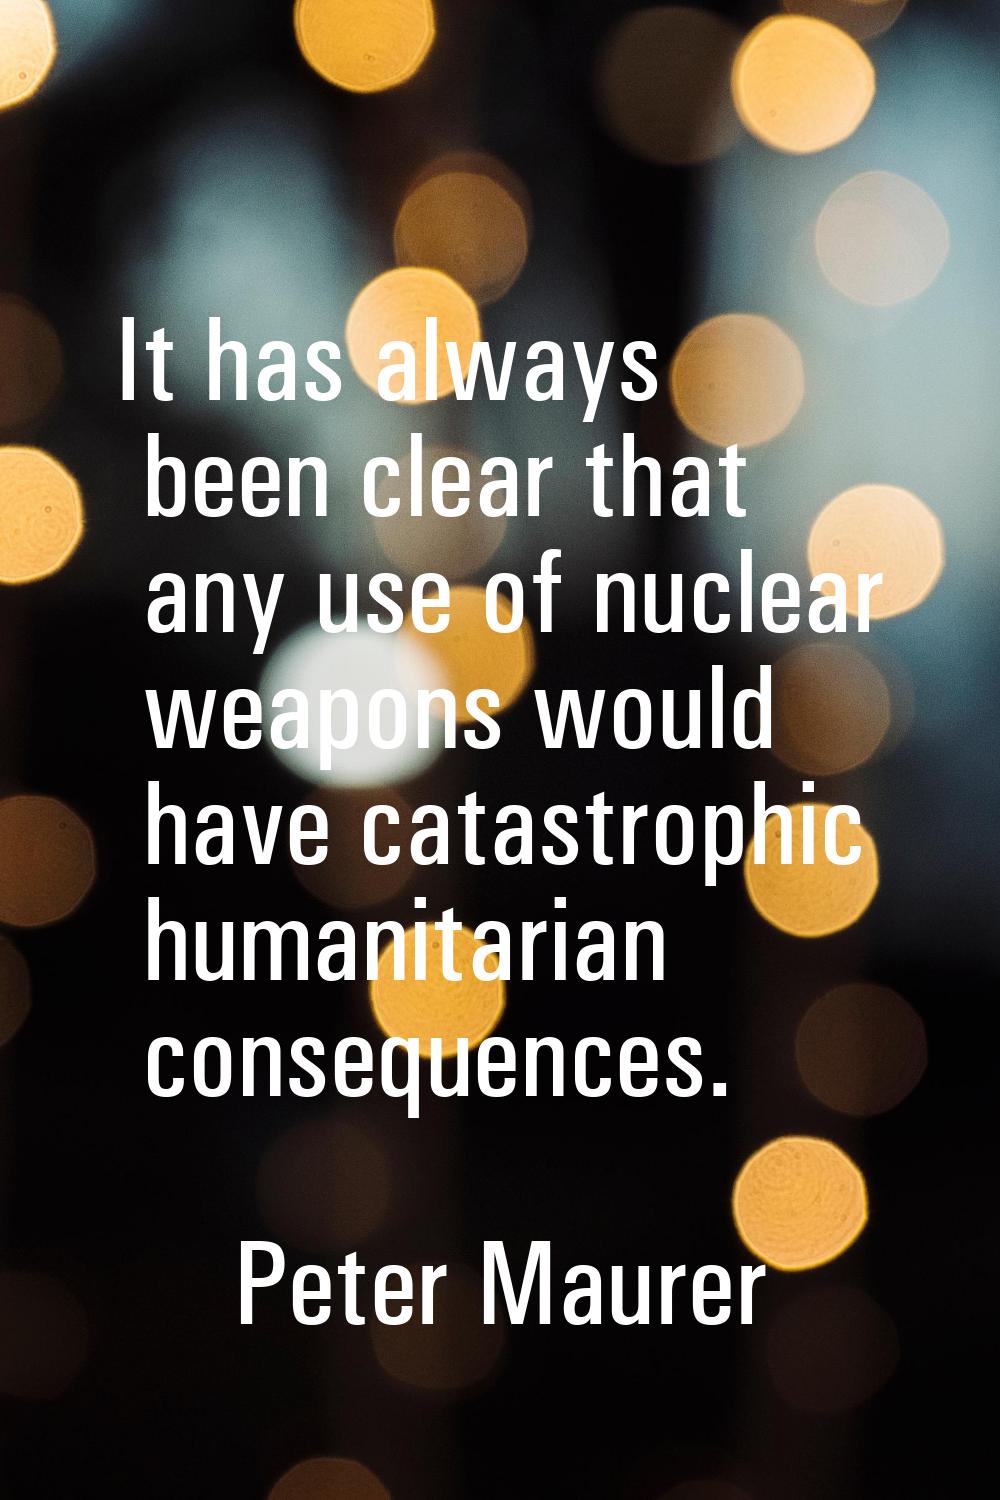 It has always been clear that any use of nuclear weapons would have catastrophic humanitarian conse